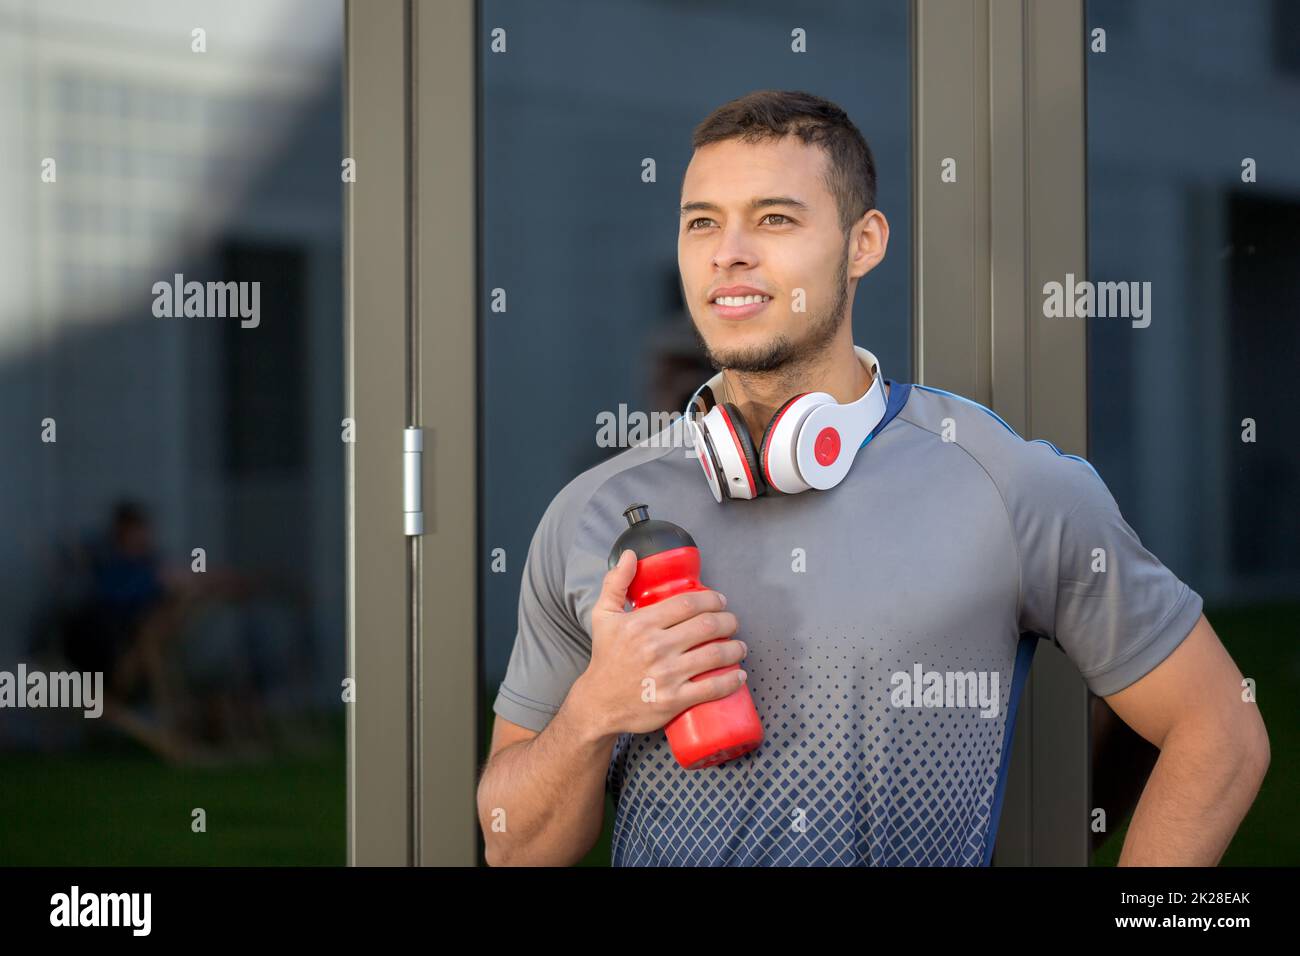 Young man looking up into the future runner outdoor sports fitness training Stock Photo